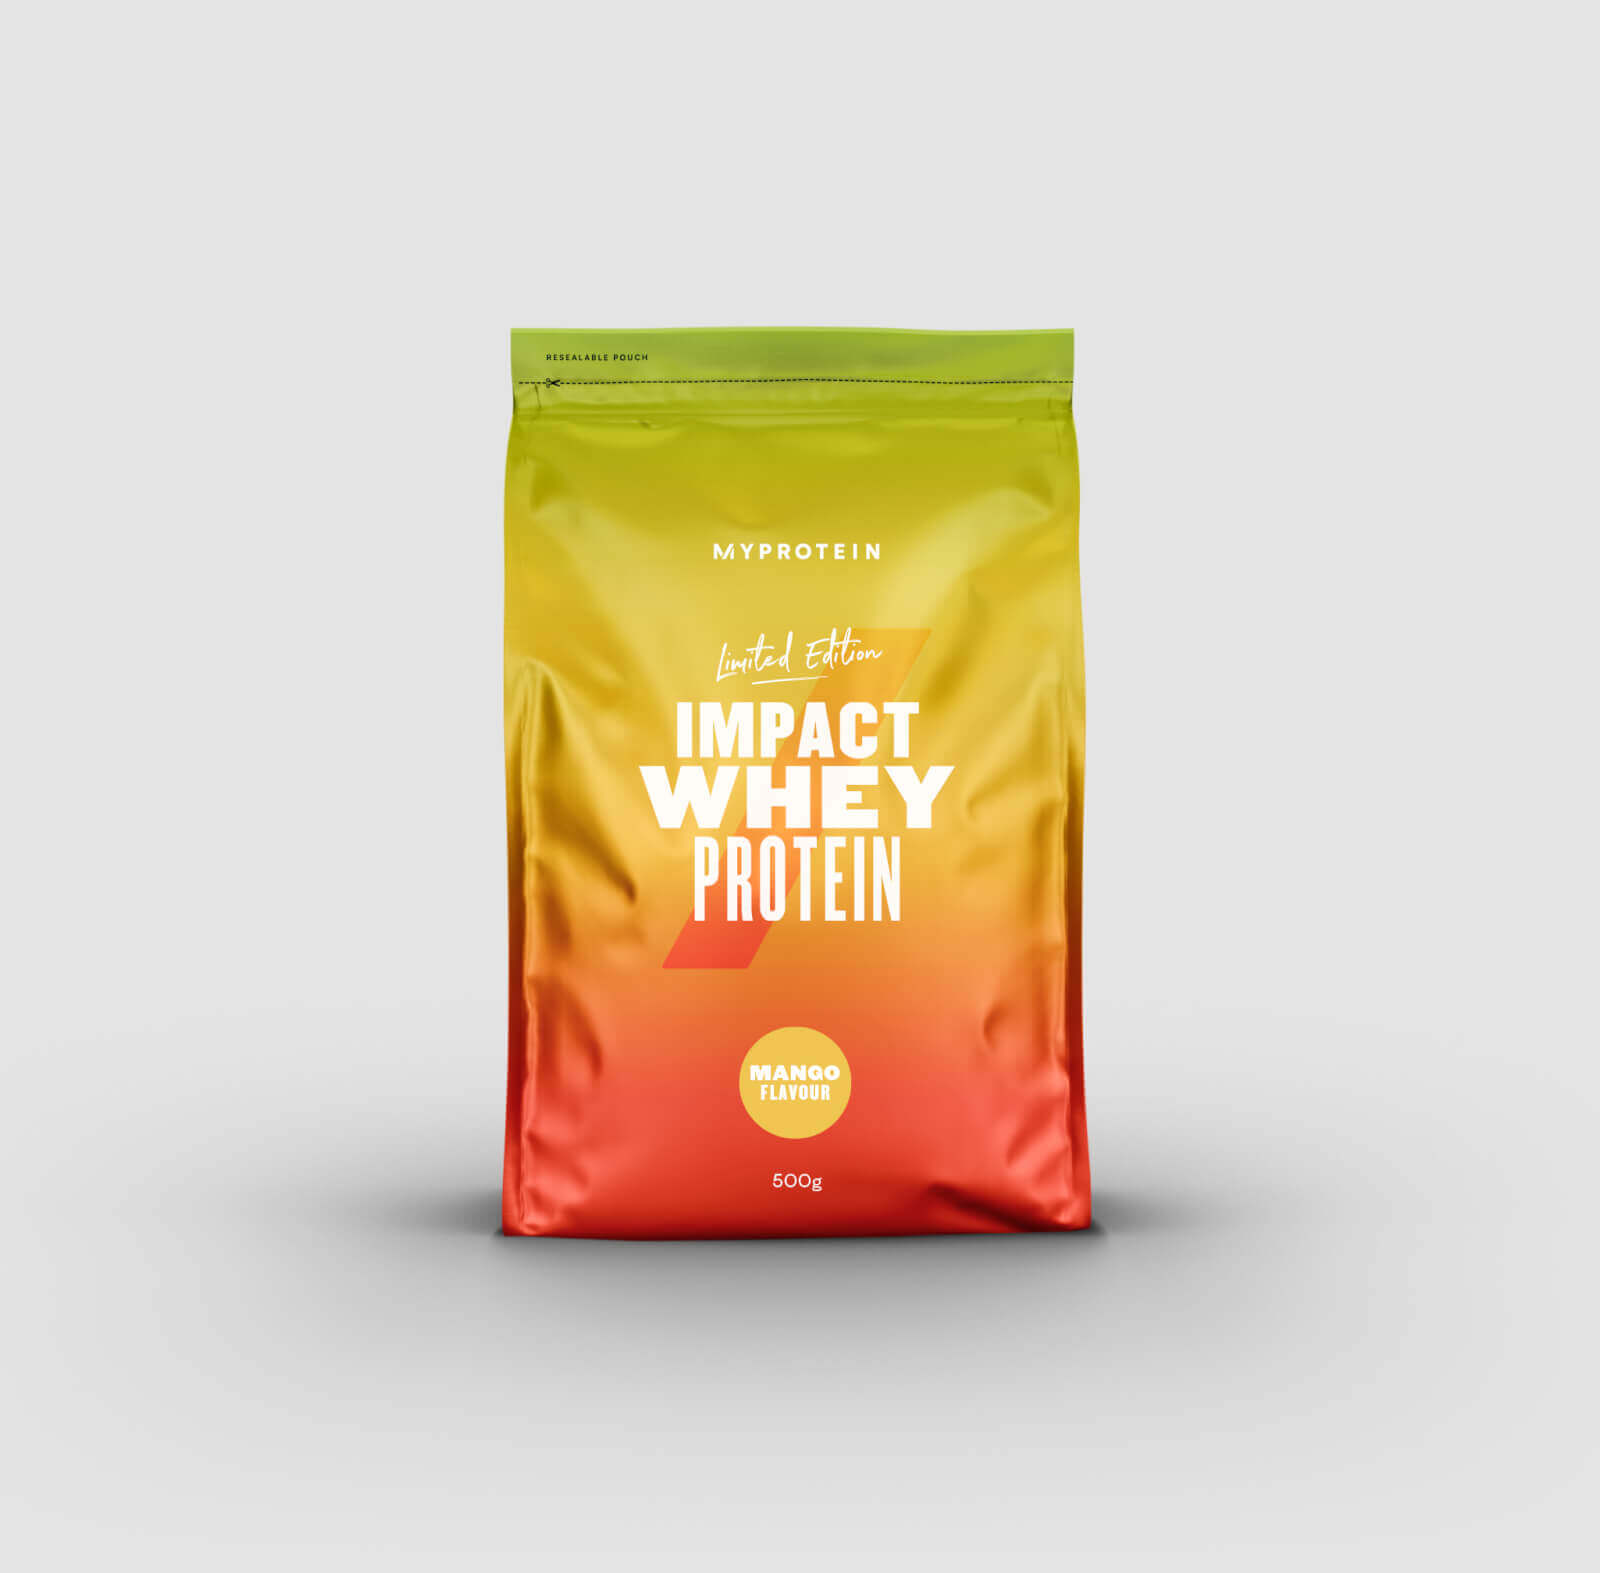 Limited Edition Impact Whey Protein (Mango)